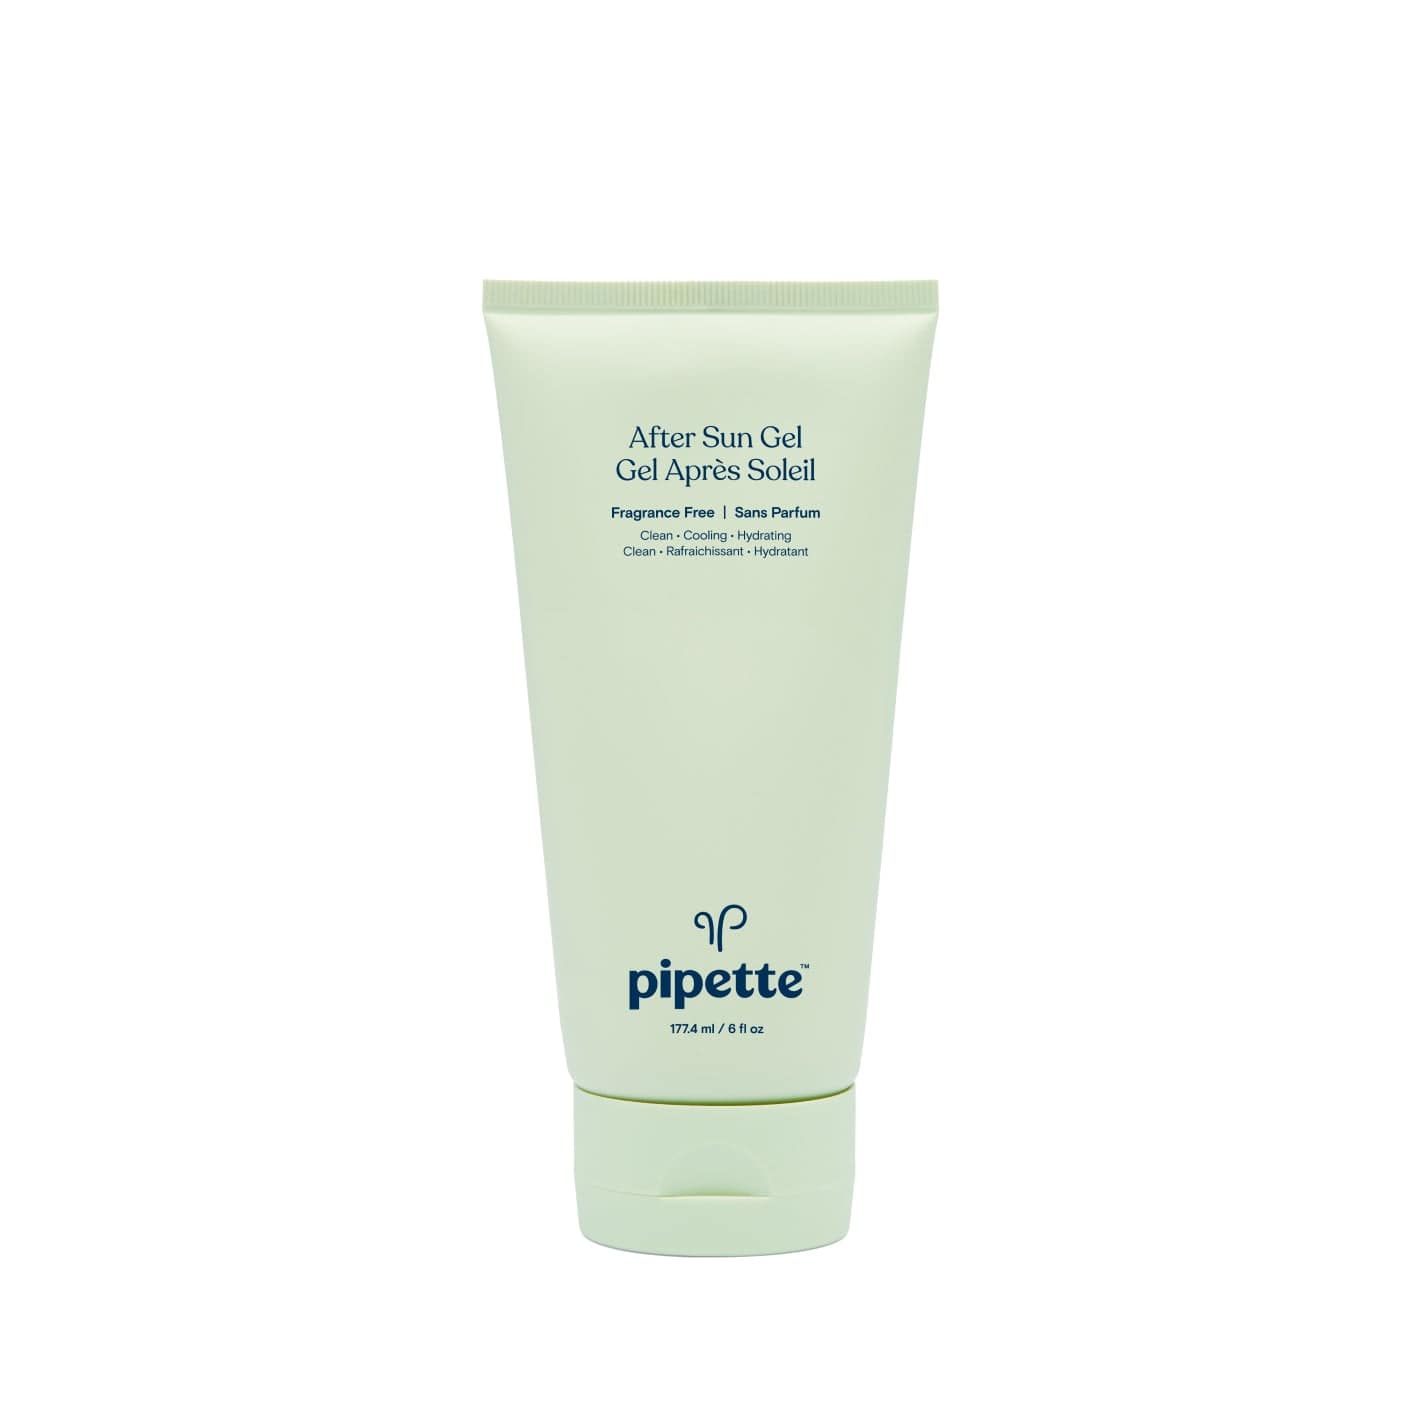 after sun gel by pipette baby